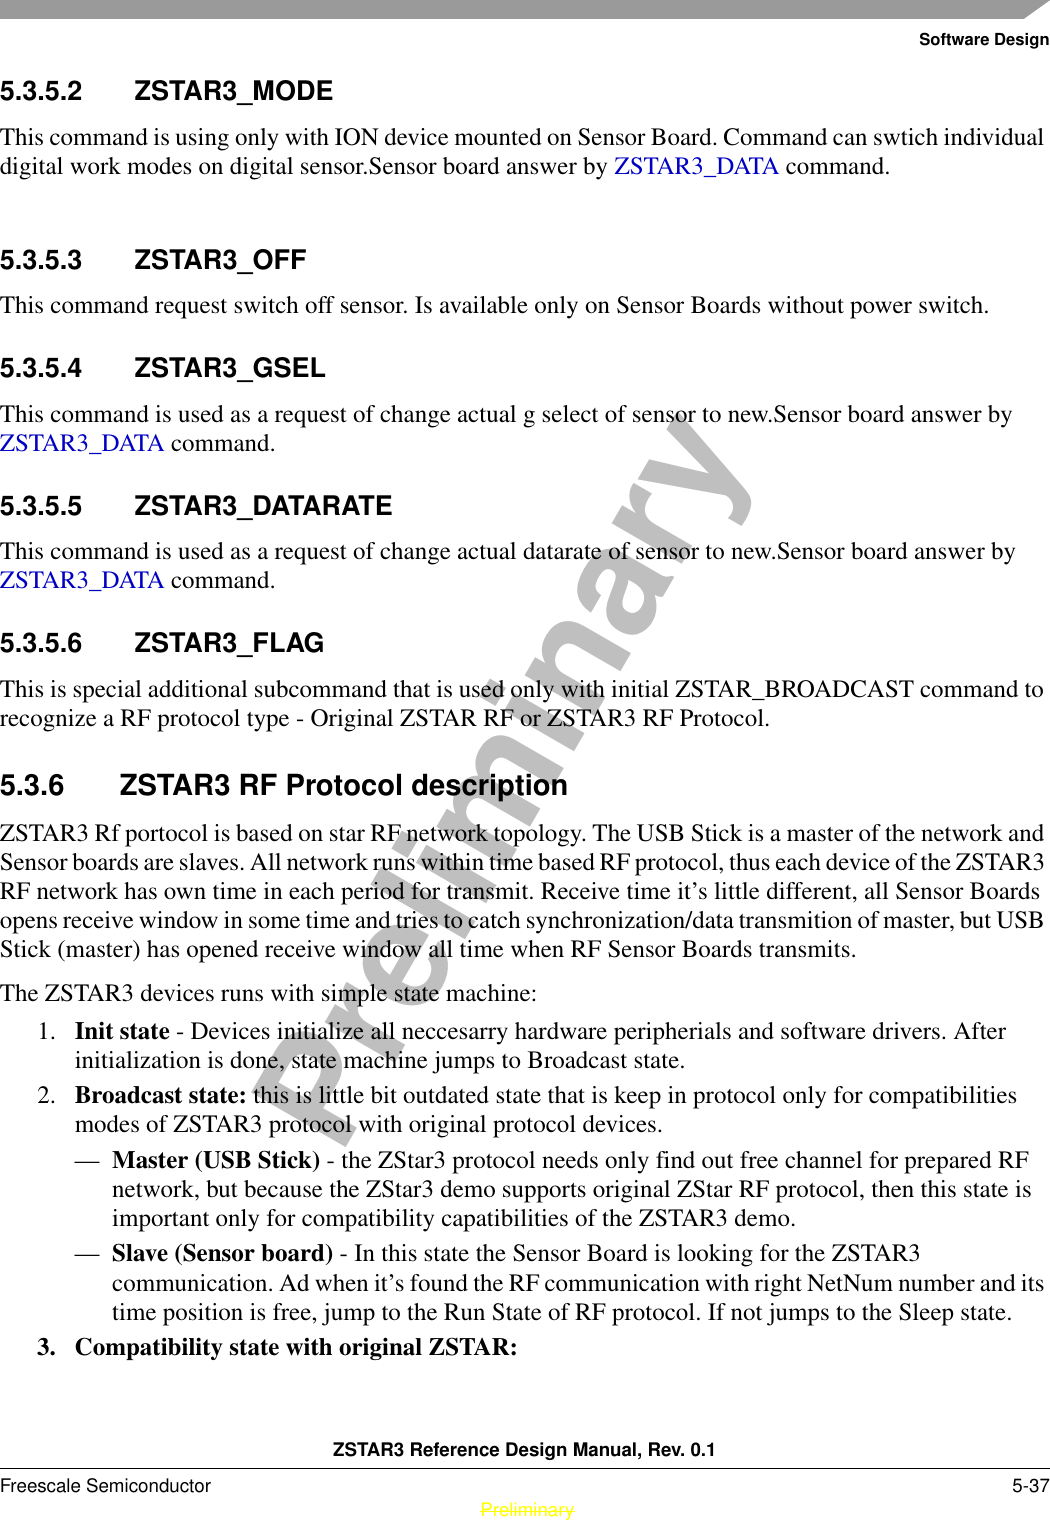 Software DesignZSTAR3 Reference Design Manual, Rev. 0.1Freescale Semiconductor 5-37 PreliminaryPreliminary5.3.5.2 ZSTAR3_MODEThis command is using only with ION device mounted on Sensor Board. Command can swtich individual digital work modes on digital sensor.Sensor board answer by ZSTAR3_DATA command.5.3.5.3 ZSTAR3_OFFThis command request switch off sensor. Is available only on Sensor Boards without power switch.5.3.5.4 ZSTAR3_GSELThis command is used as a request of change actual g select of sensor to new.Sensor board answer by ZSTAR3_DATA command.5.3.5.5 ZSTAR3_DATARATEThis command is used as a request of change actual datarate of sensor to new.Sensor board answer by ZSTAR3_DATA command.5.3.5.6 ZSTAR3_FLAGThis is special additional subcommand that is used only with initial ZSTAR_BROADCAST command to recognize a RF protocol type - Original ZSTAR RF or ZSTAR3 RF Protocol.5.3.6 ZSTAR3 RF Protocol descriptionZSTAR3 Rf portocol is based on star RF network topology. The USB Stick is a master of the network and Sensor boards are slaves. All network runs within time based RF protocol, thus each device of the ZSTAR3 RF network has own time in each period for transmit. Receive time it’s little different, all Sensor Boards opens receive window in some time and tries to catch synchronization/data transmition of master, but USB Stick (master) has opened receive window all time when RF Sensor Boards transmits.The ZSTAR3 devices runs with simple state machine:1. Init state - Devices initialize all neccesarry hardware peripherials and software drivers. After initialization is done, state machine jumps to Broadcast state.2. Broadcast state: this is little bit outdated state that is keep in protocol only for compatibilities modes of ZSTAR3 protocol with original protocol devices.—Master (USB Stick) - the ZStar3 protocol needs only find out free channel for prepared RF network, but because the ZStar3 demo supports original ZStar RF protocol, then this state is important only for compatibility capatibilities of the ZSTAR3 demo.—Slave (Sensor board) - In this state the Sensor Board is looking for the ZSTAR3 communication. Ad when it’s found the RF communication with right NetNum number and its time position is free, jump to the Run State of RF protocol. If not jumps to the Sleep state.3. Compatibility state with original ZSTAR: